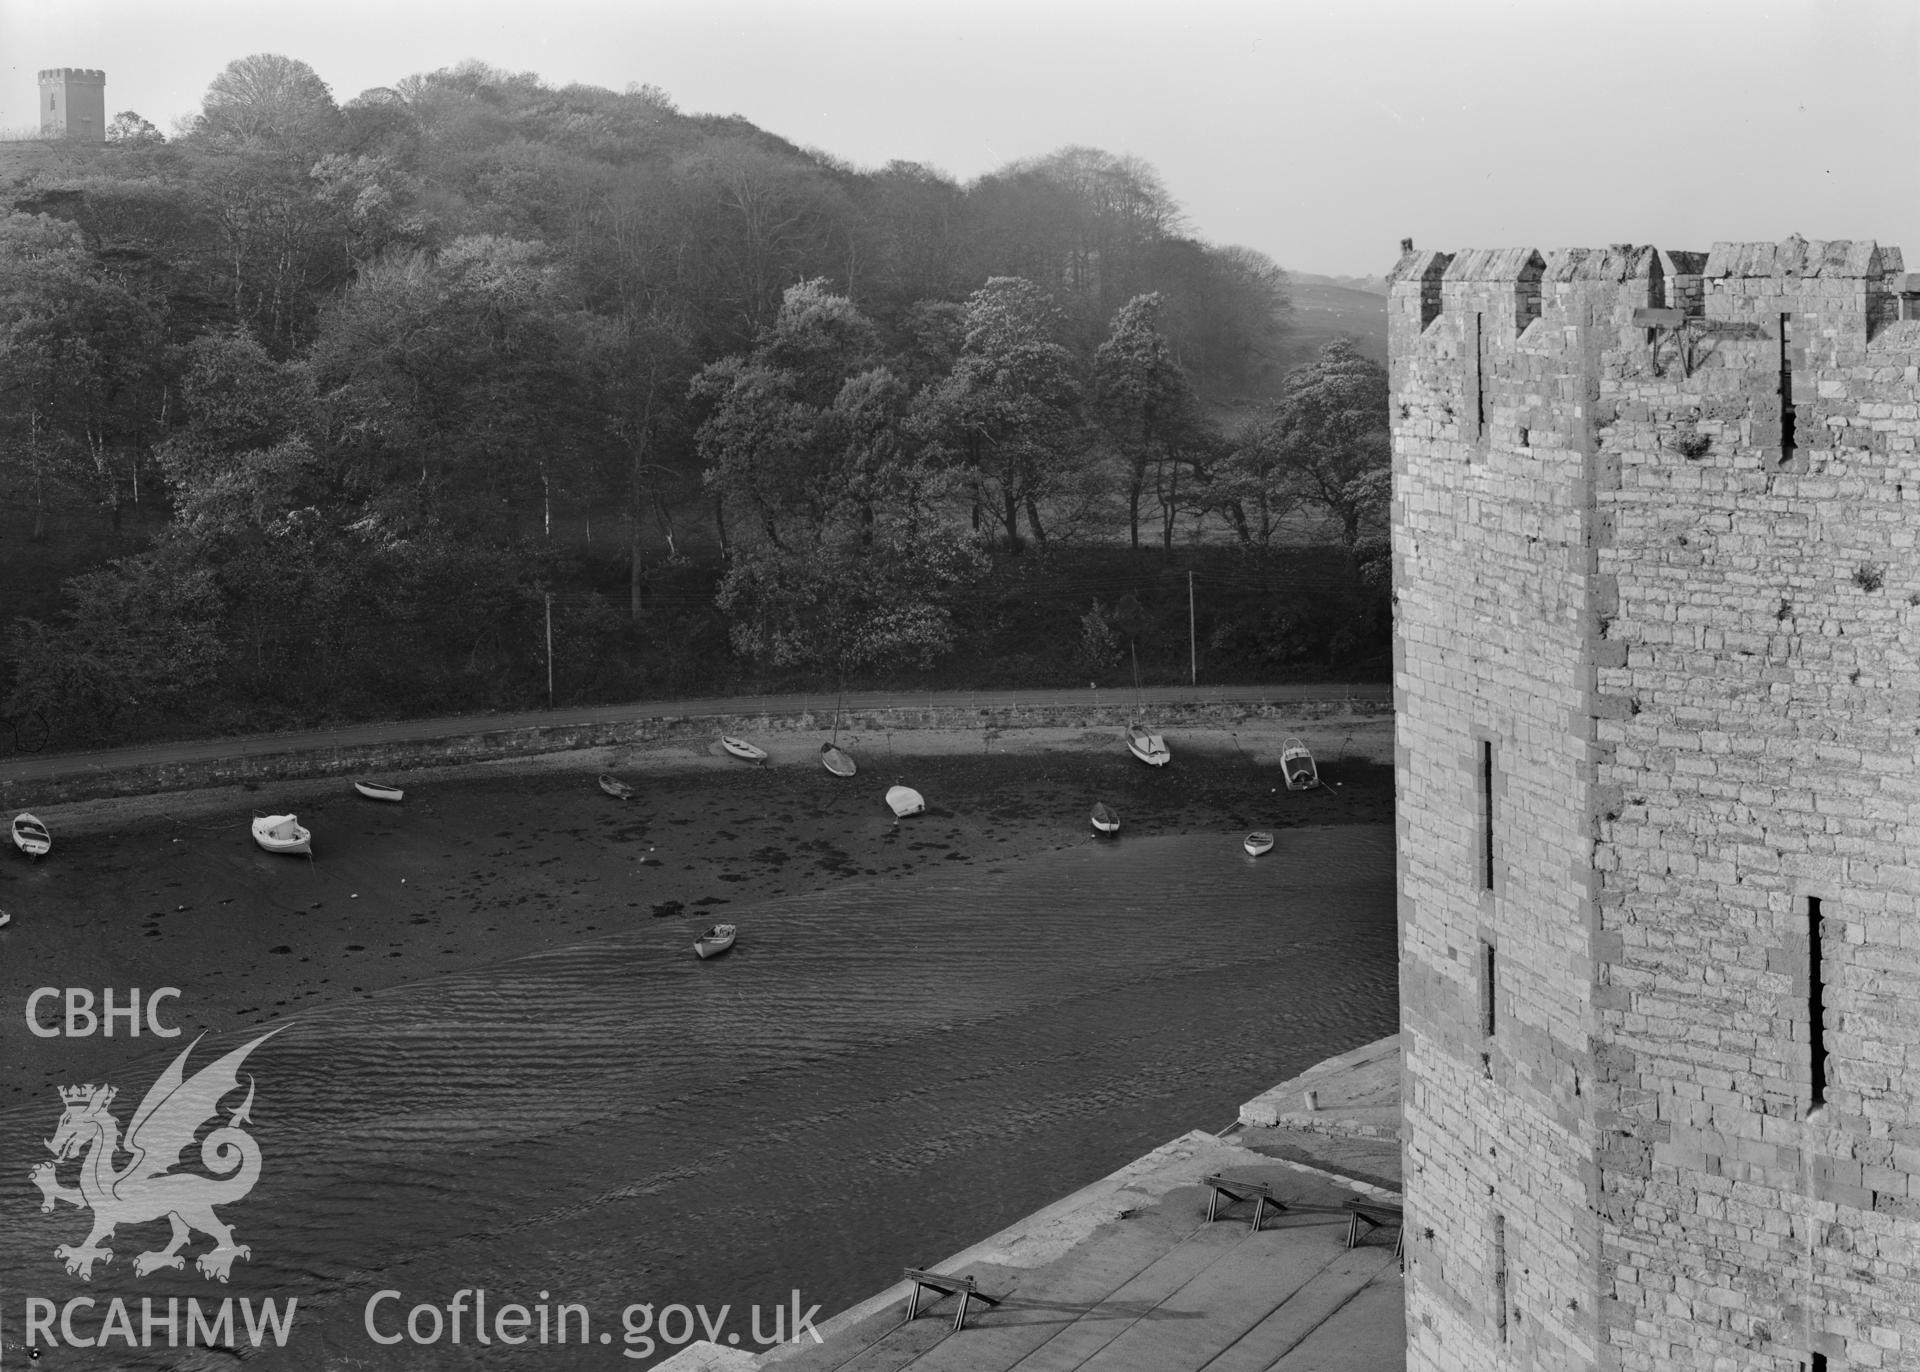 D.O.E photograph of Caernarfon Castle - view across the river Seiont from the walls of the Castle. .